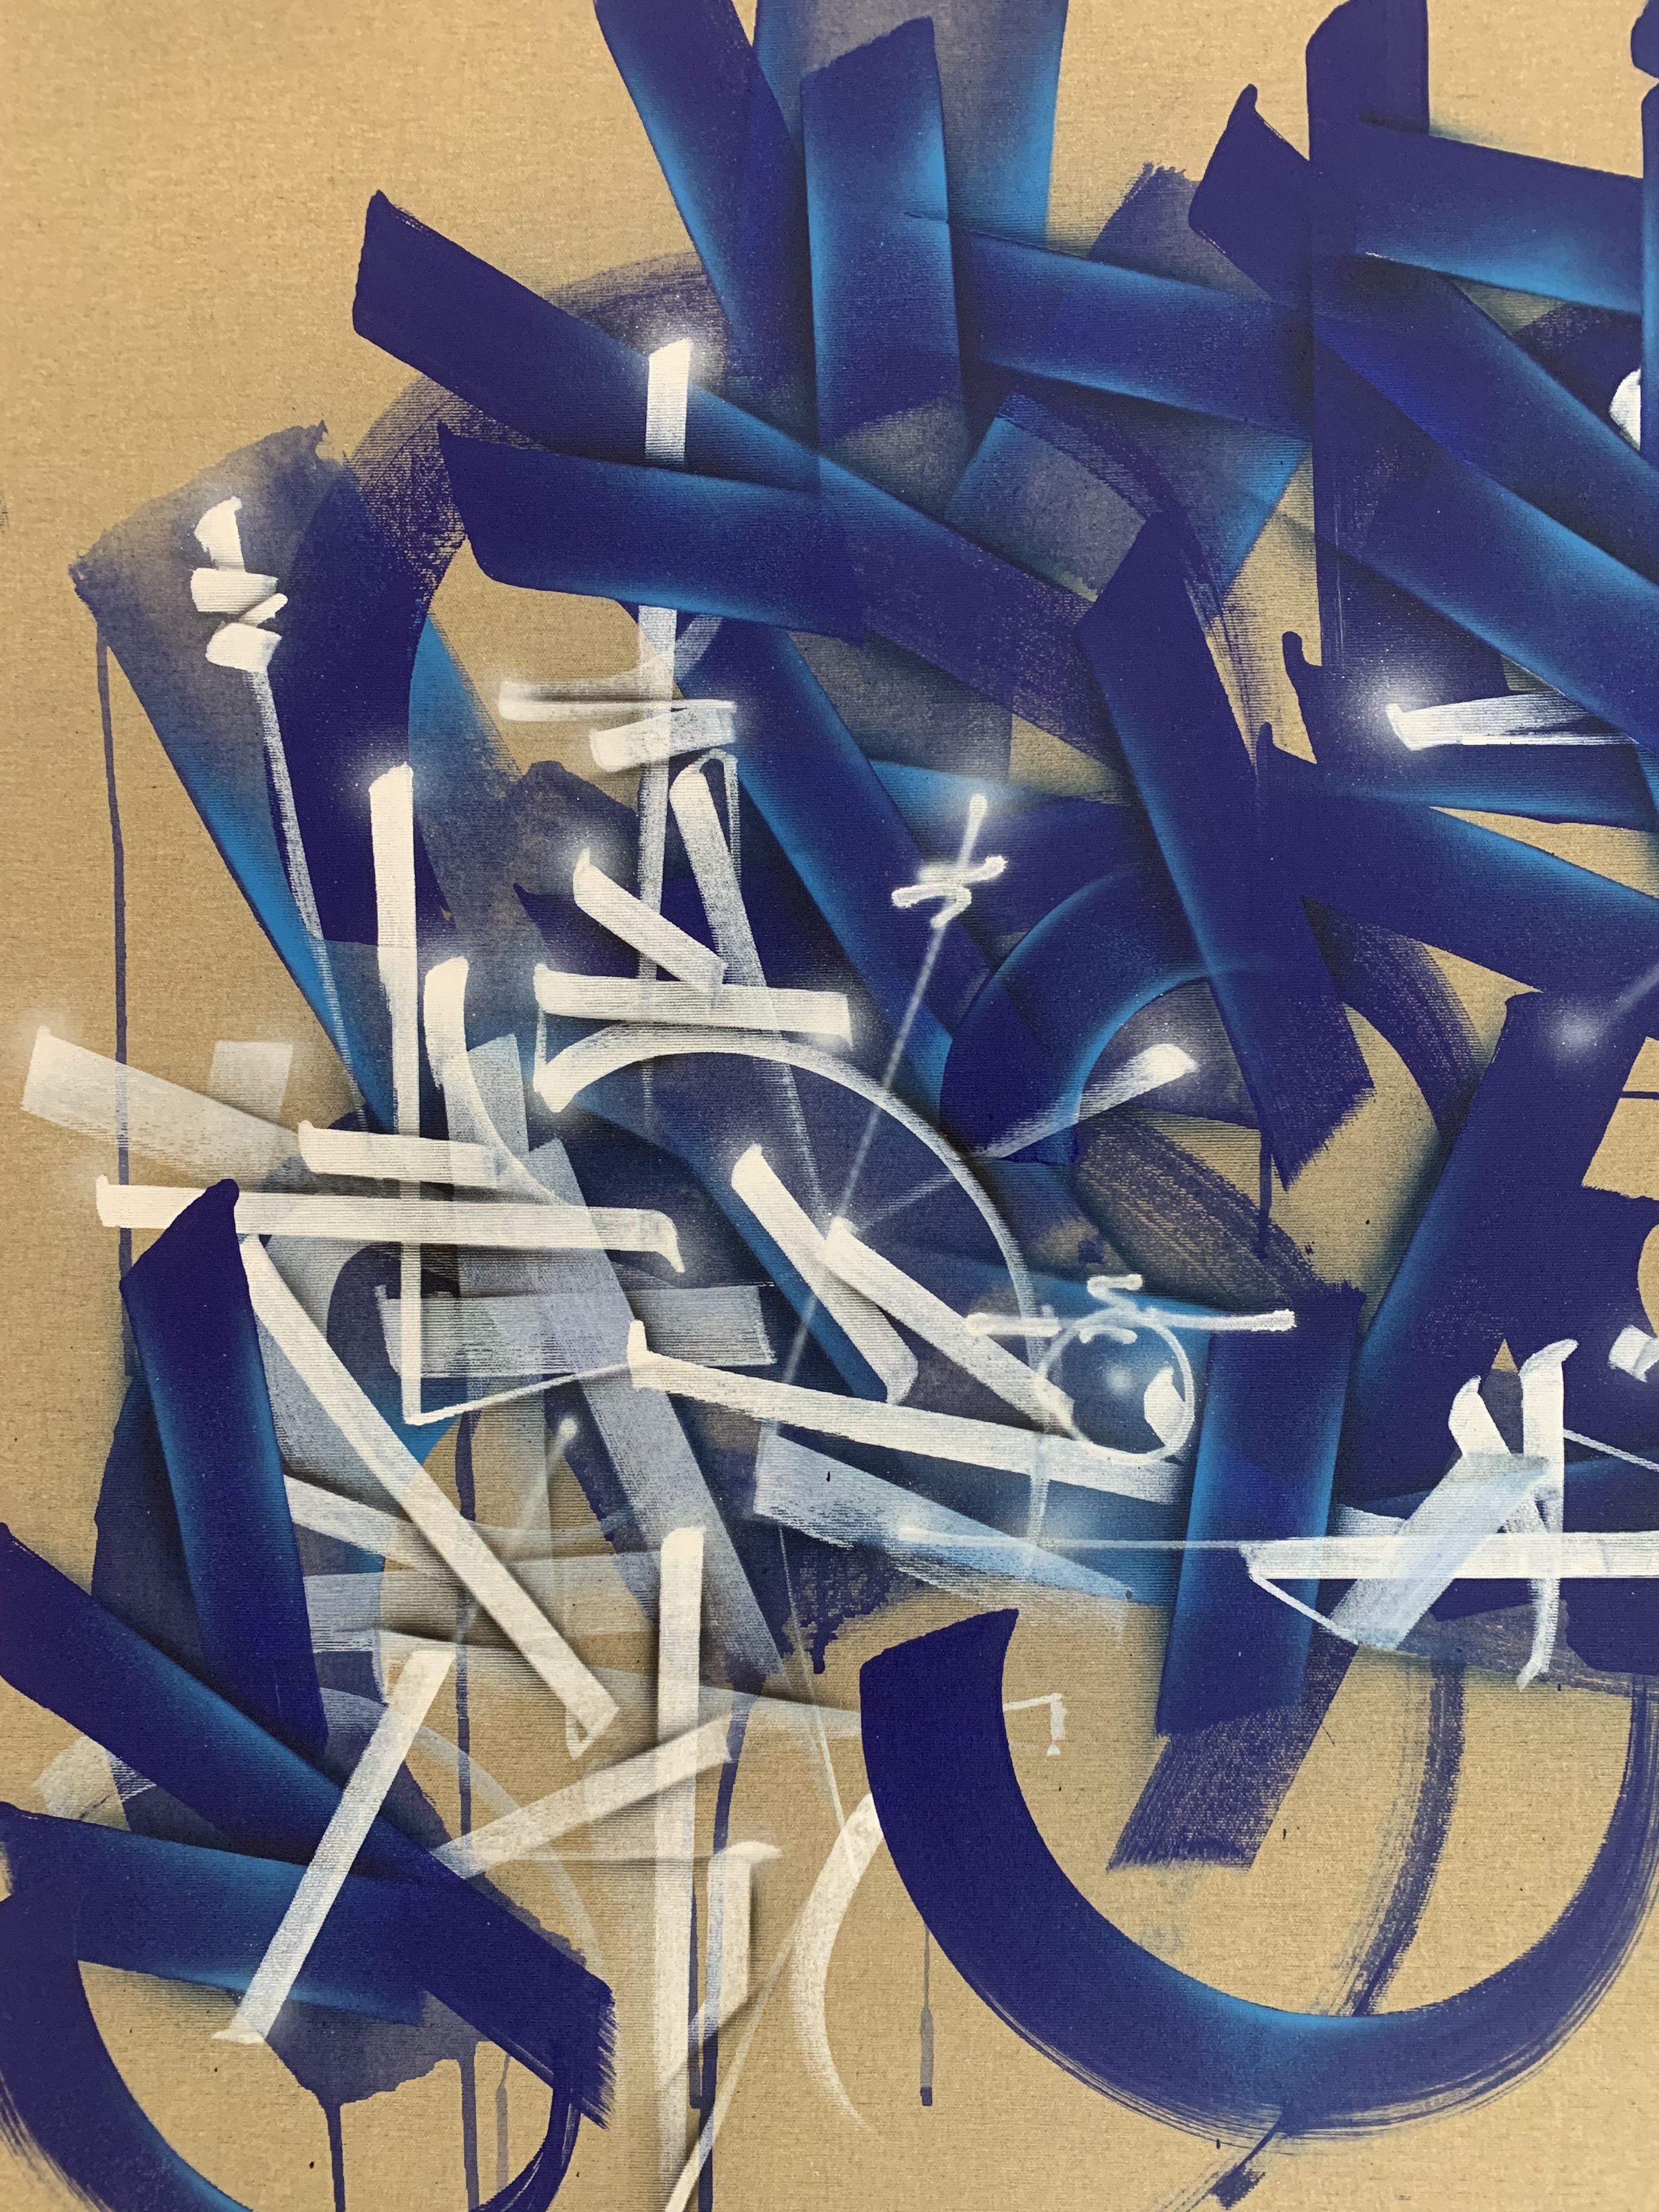 Soklak, a painter born in 1977 in Paris, has a distinctive artistic journey marked by a bold fusion of graffiti, calligraphy, and abstraction.
In 1986, young Soklak experienced his first artistic fascination when he discovered the graffiti that